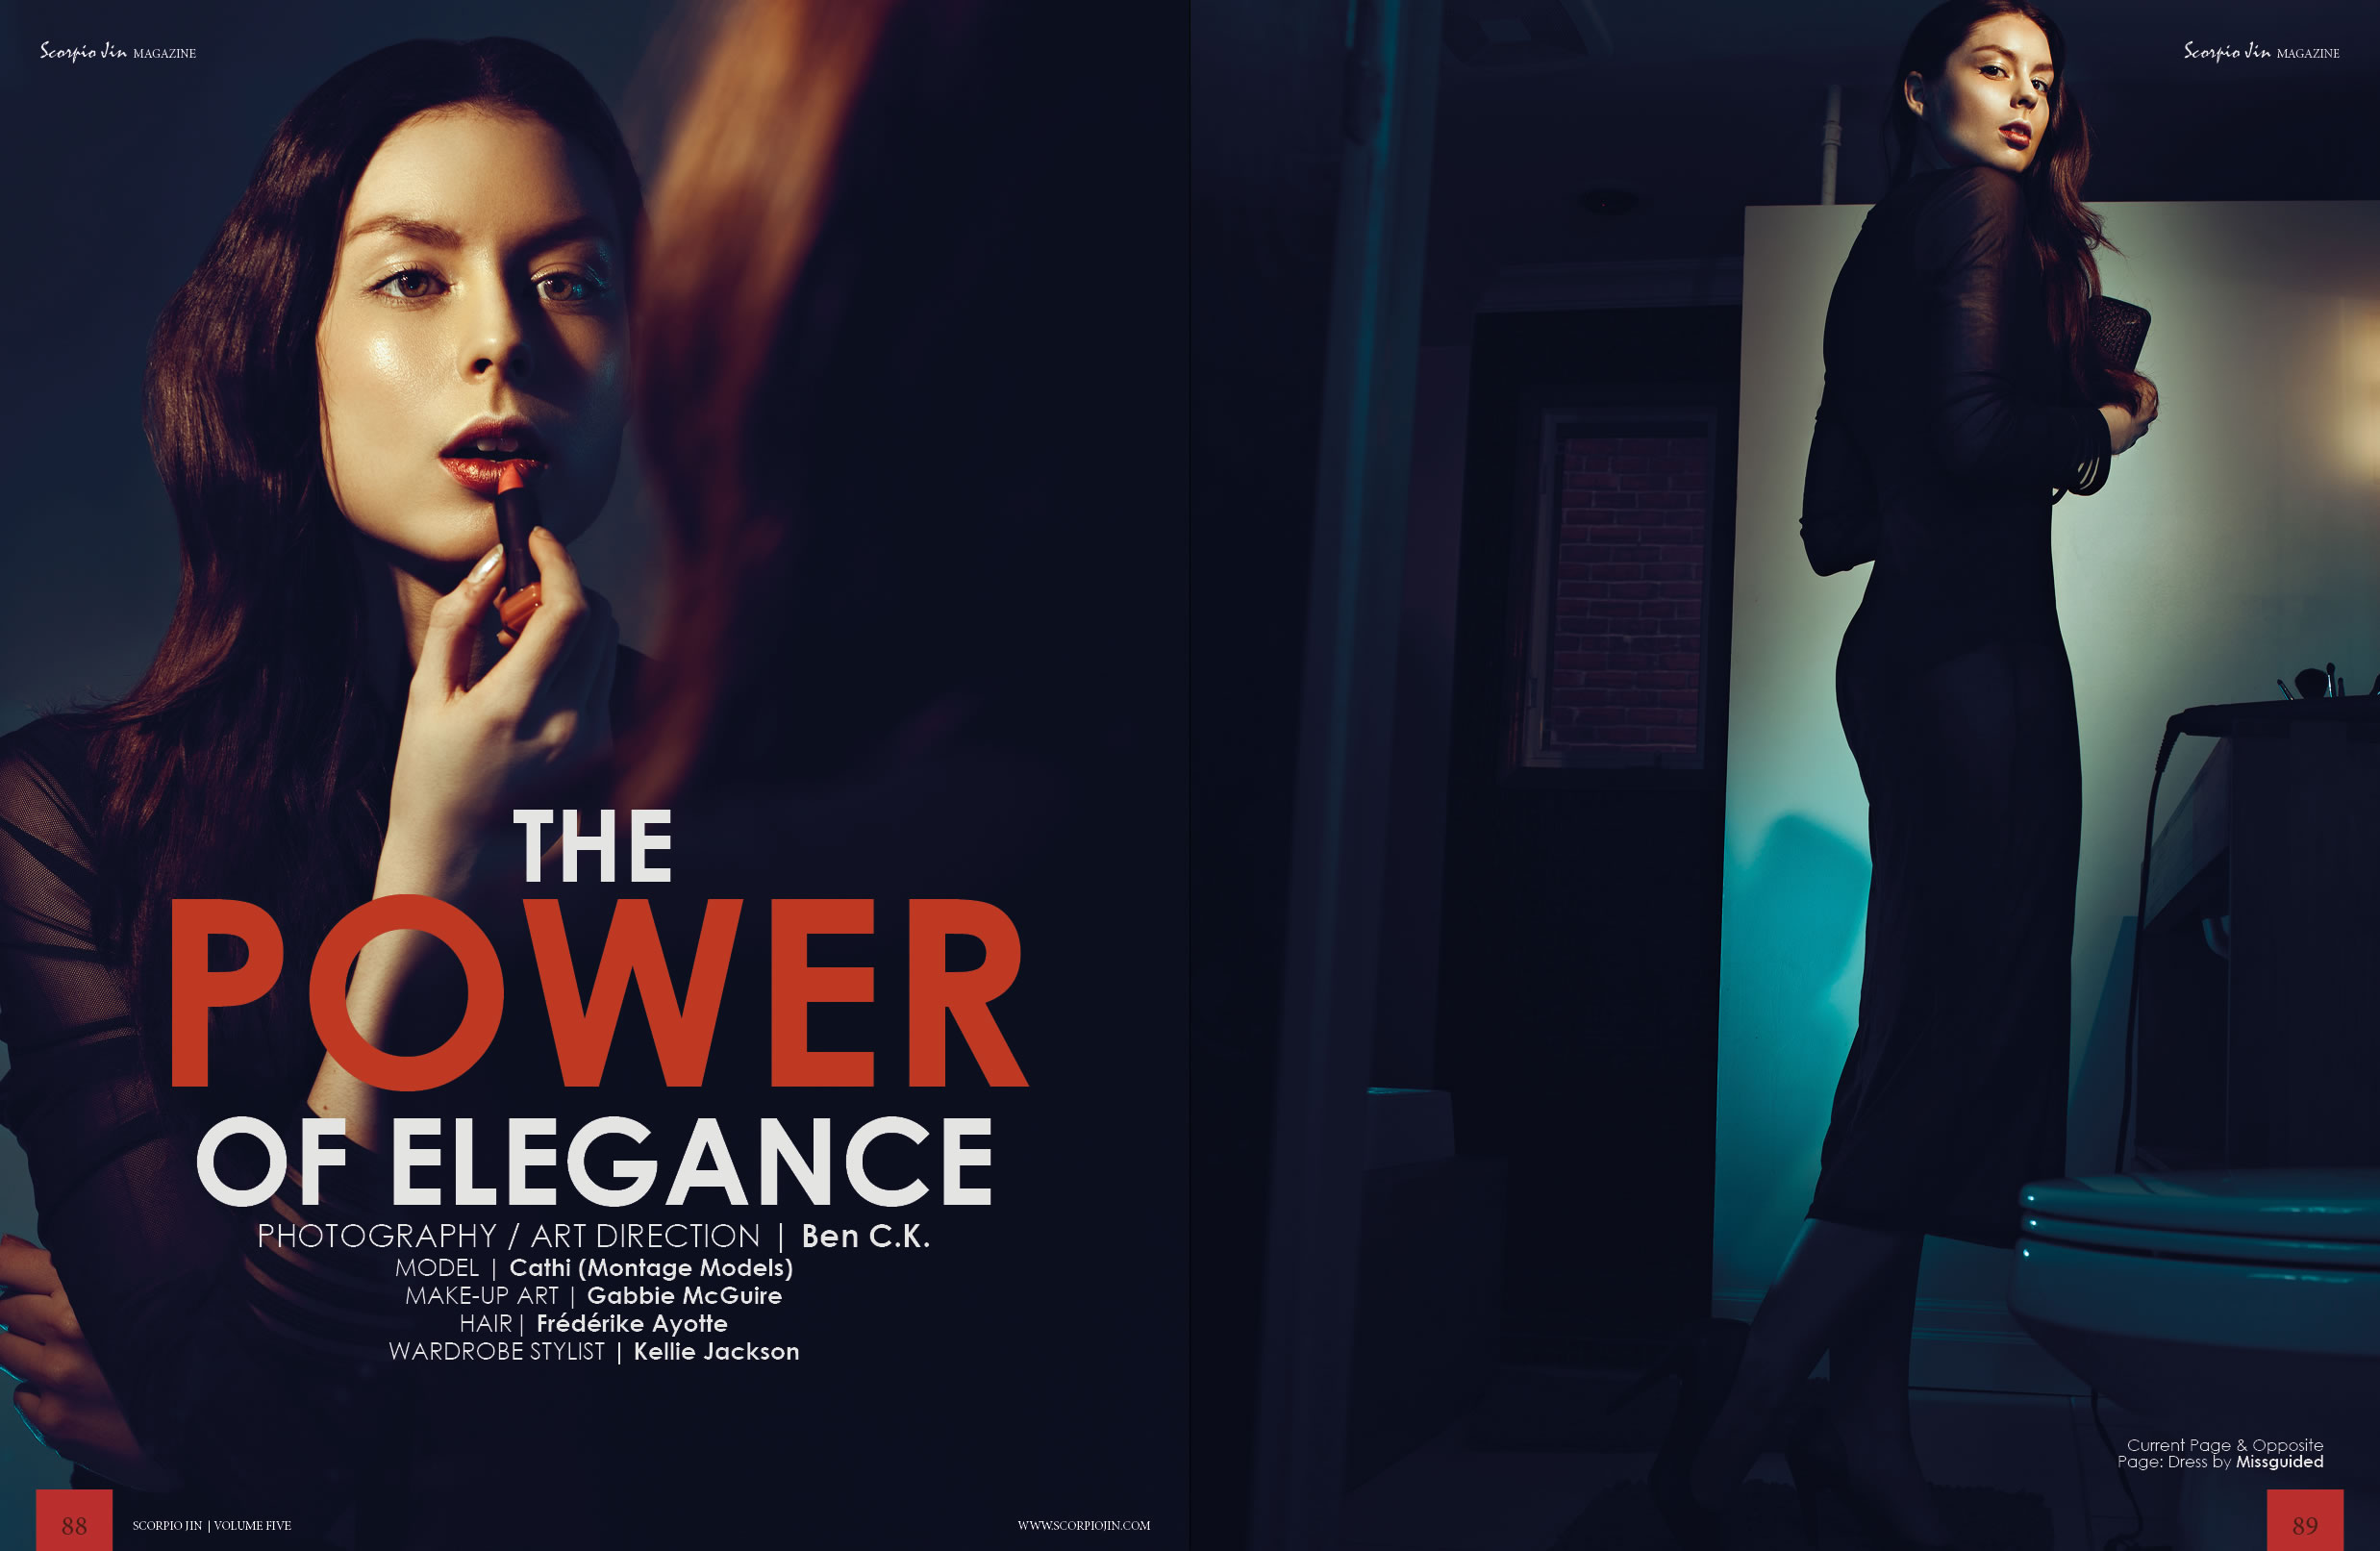 The power of elegance – Benck's Photography